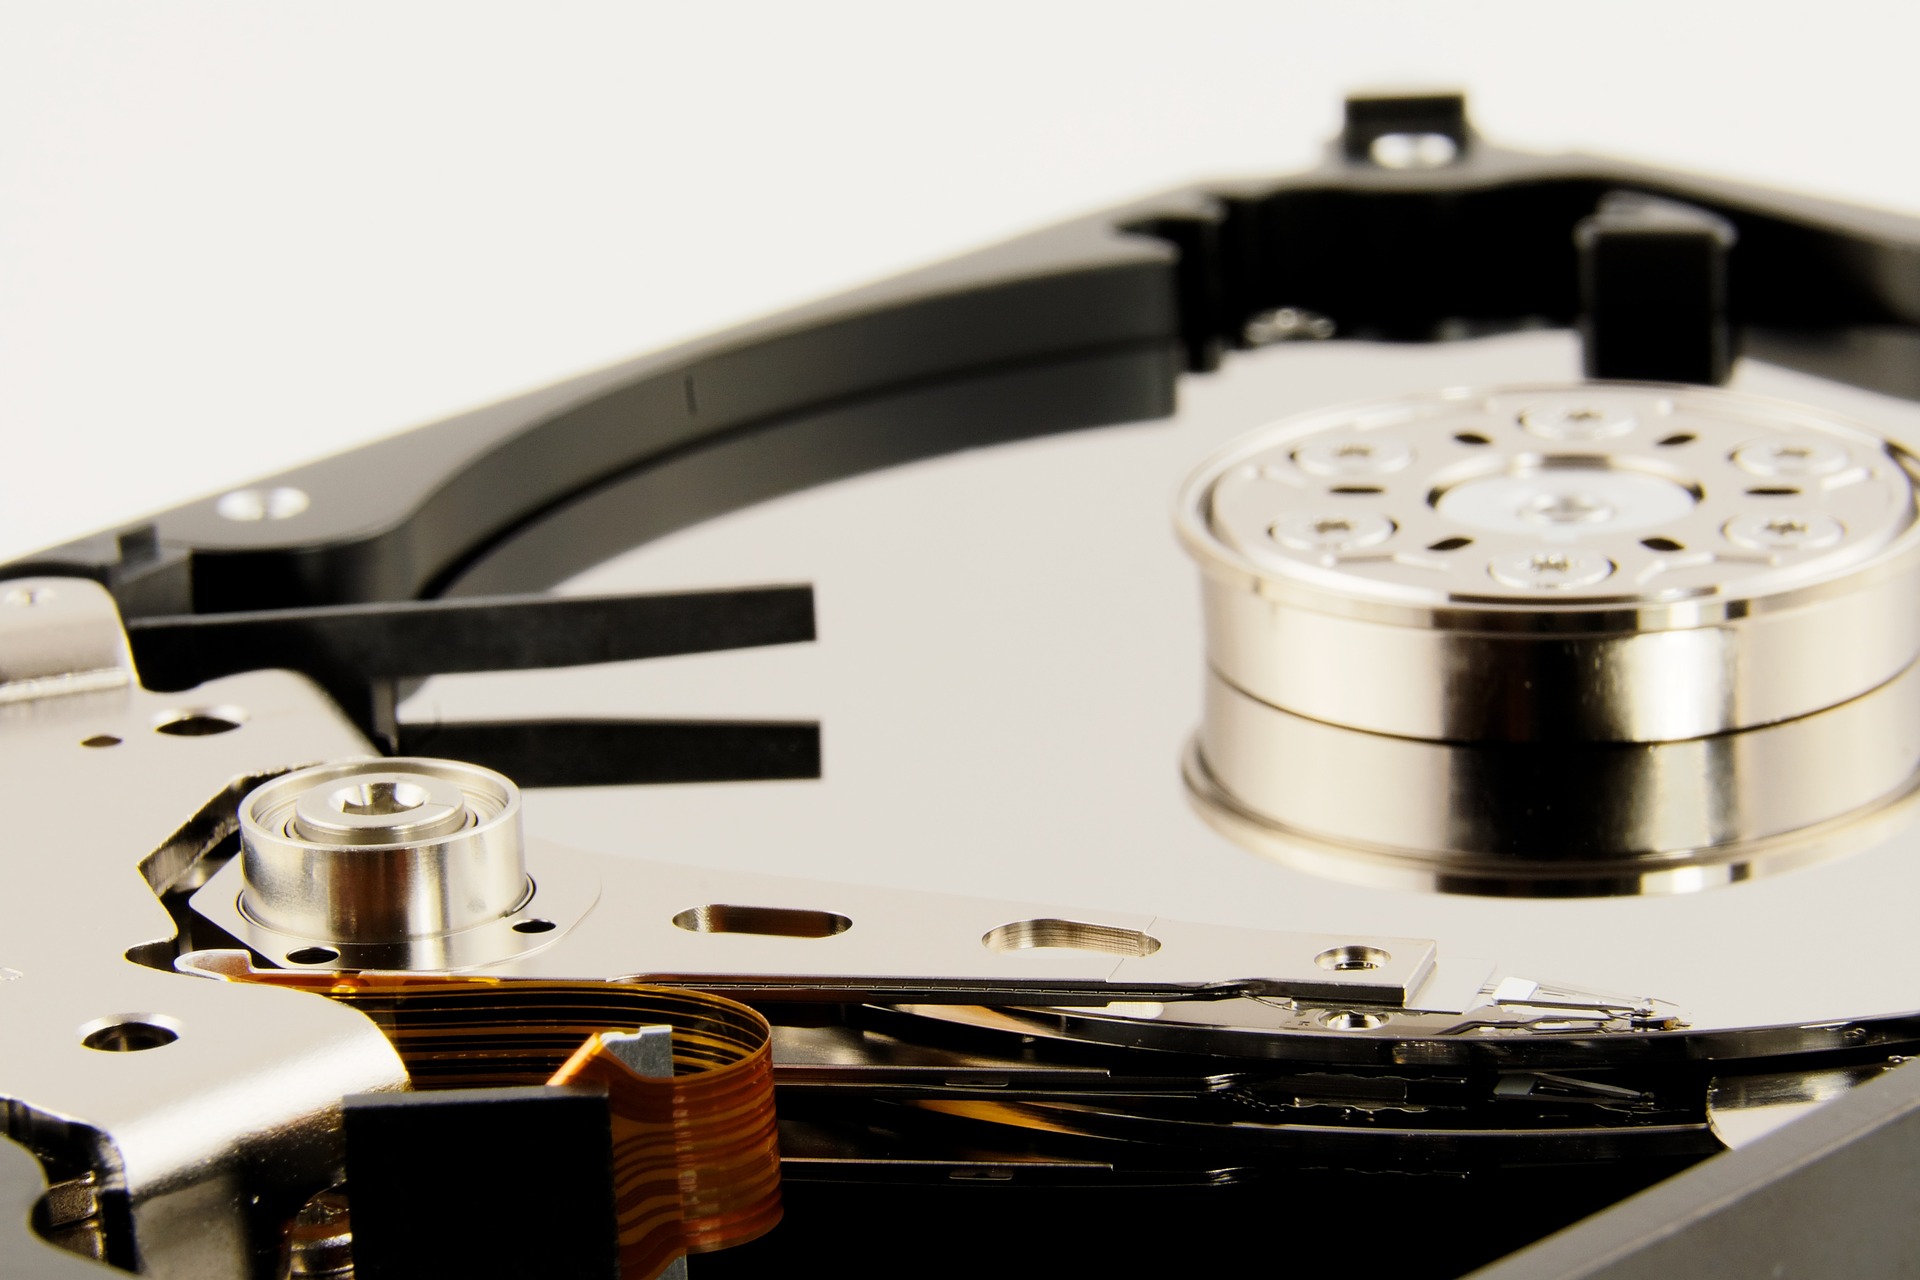 How to Deal with Hard Drive Recovery - Image 2